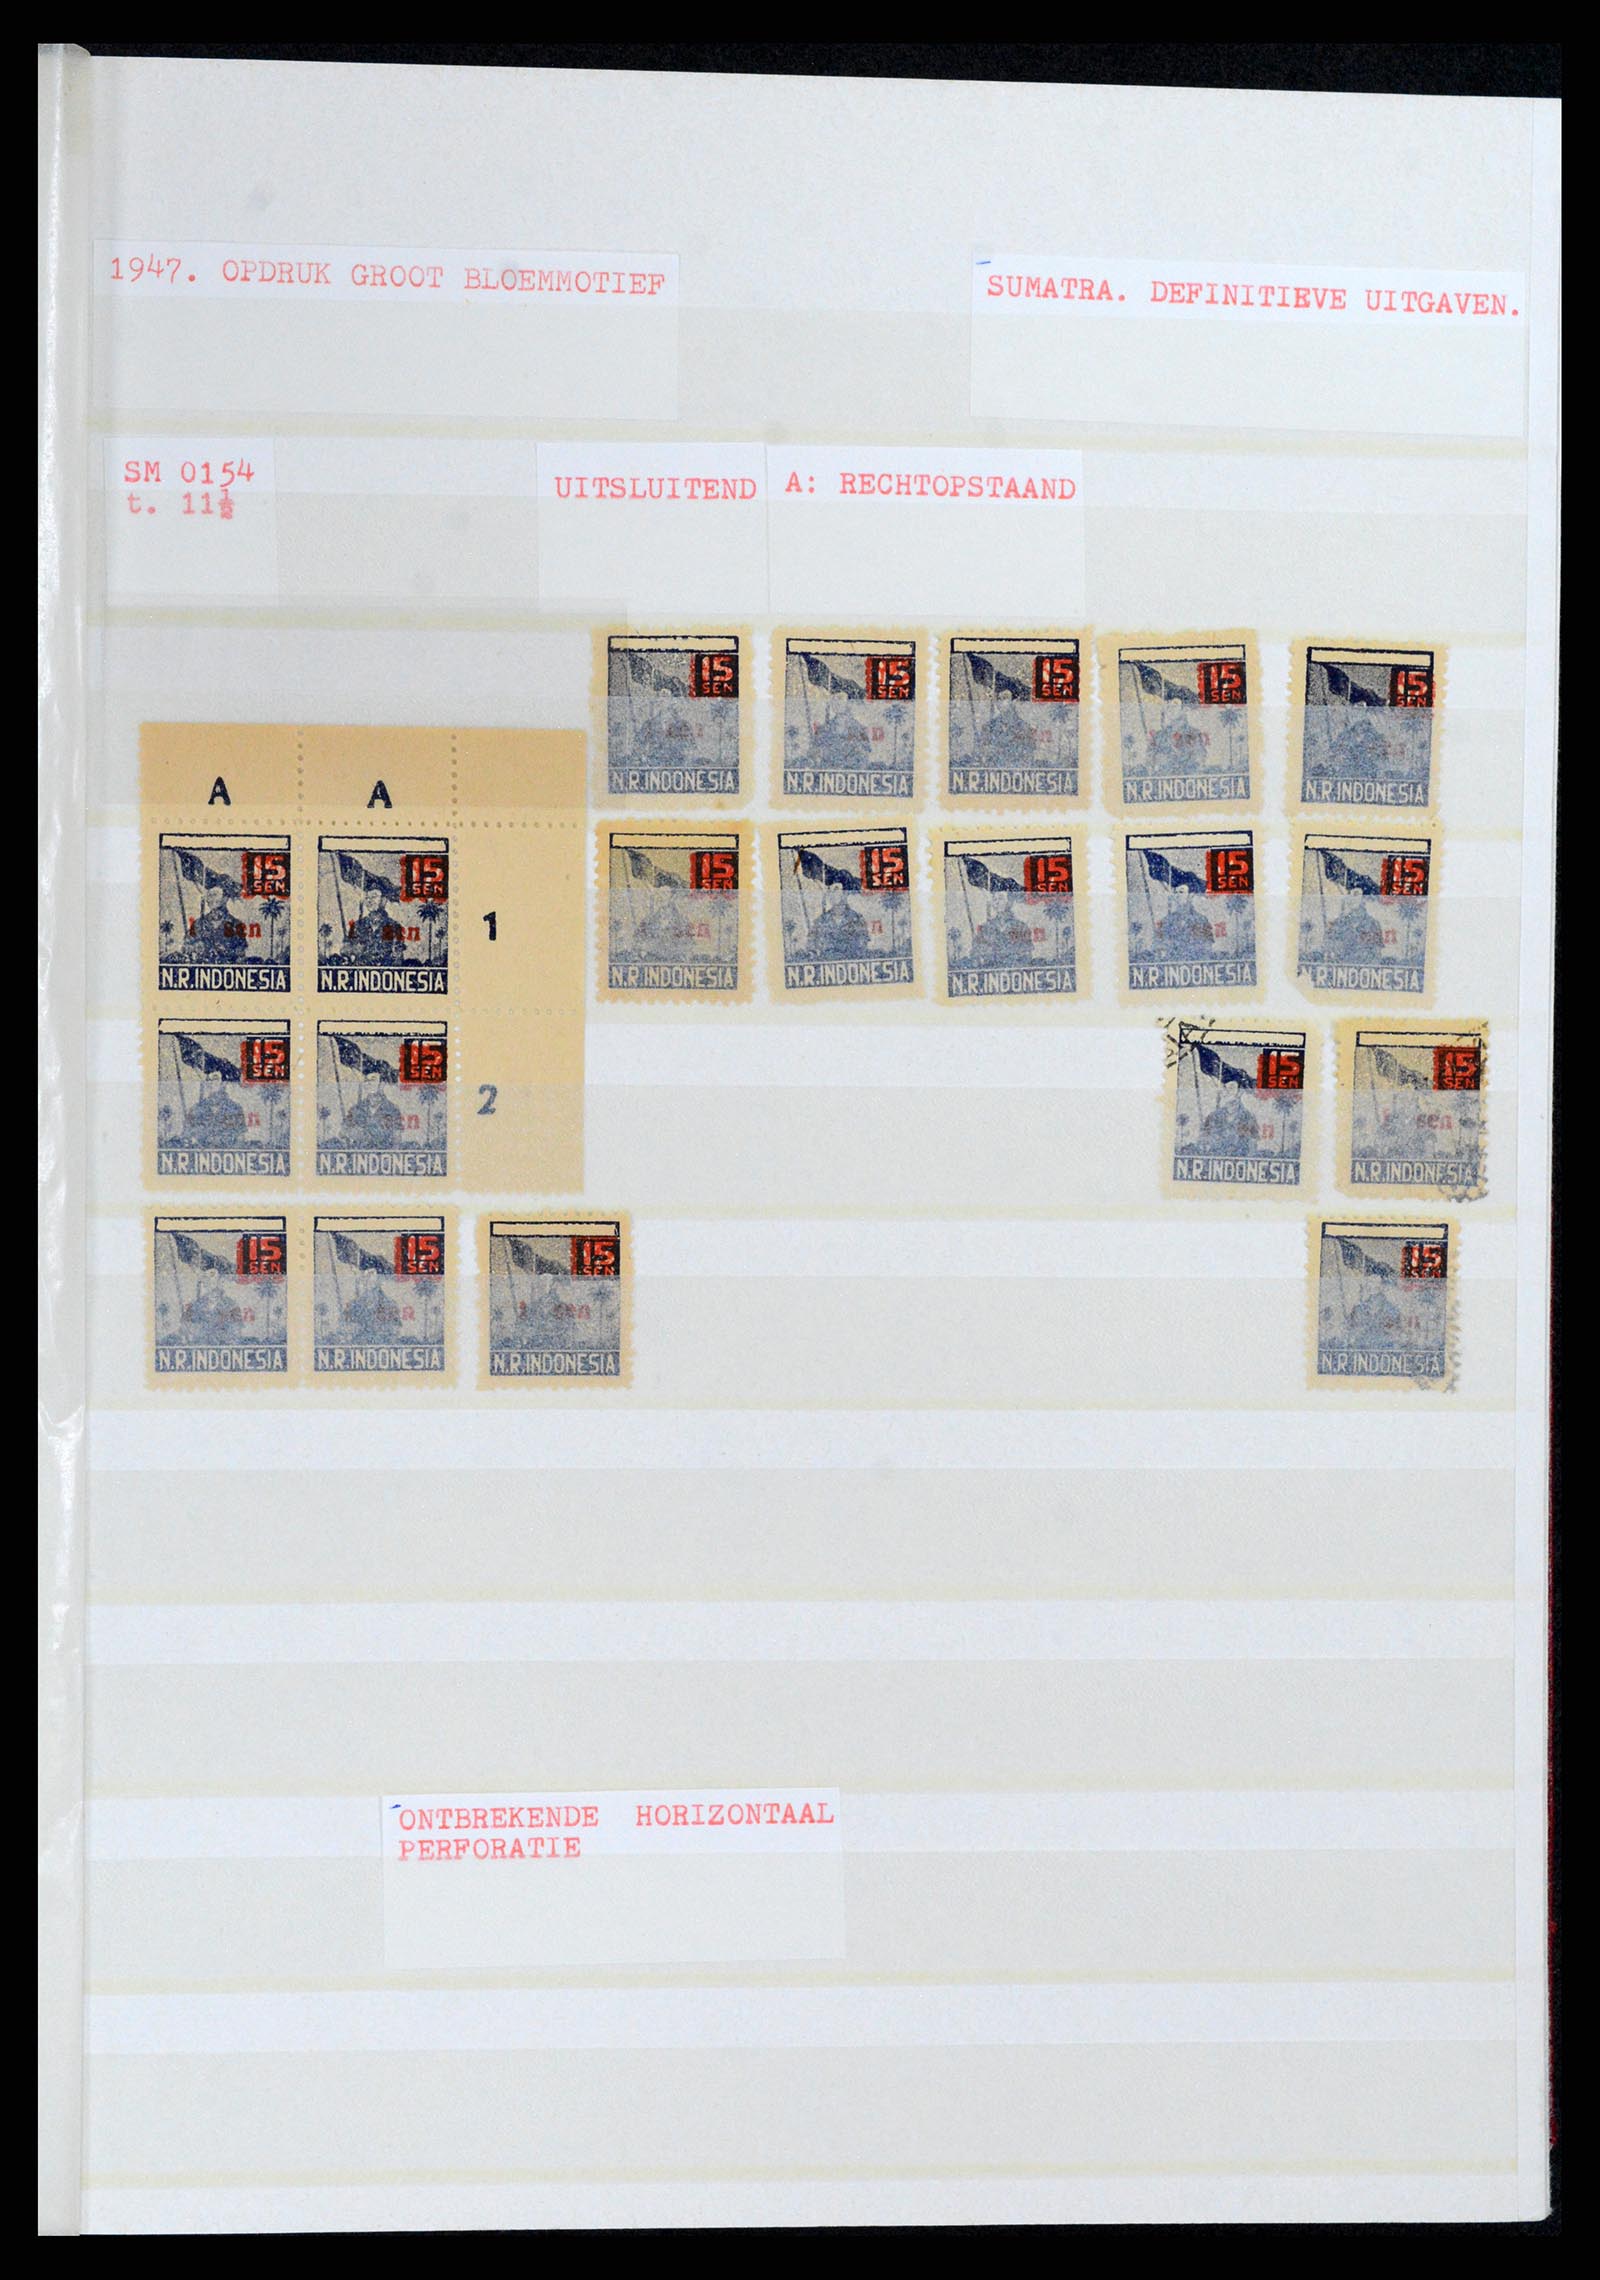 37692 146 - Stamp collection 37692 Indonesia interimperiod 1945-1499.